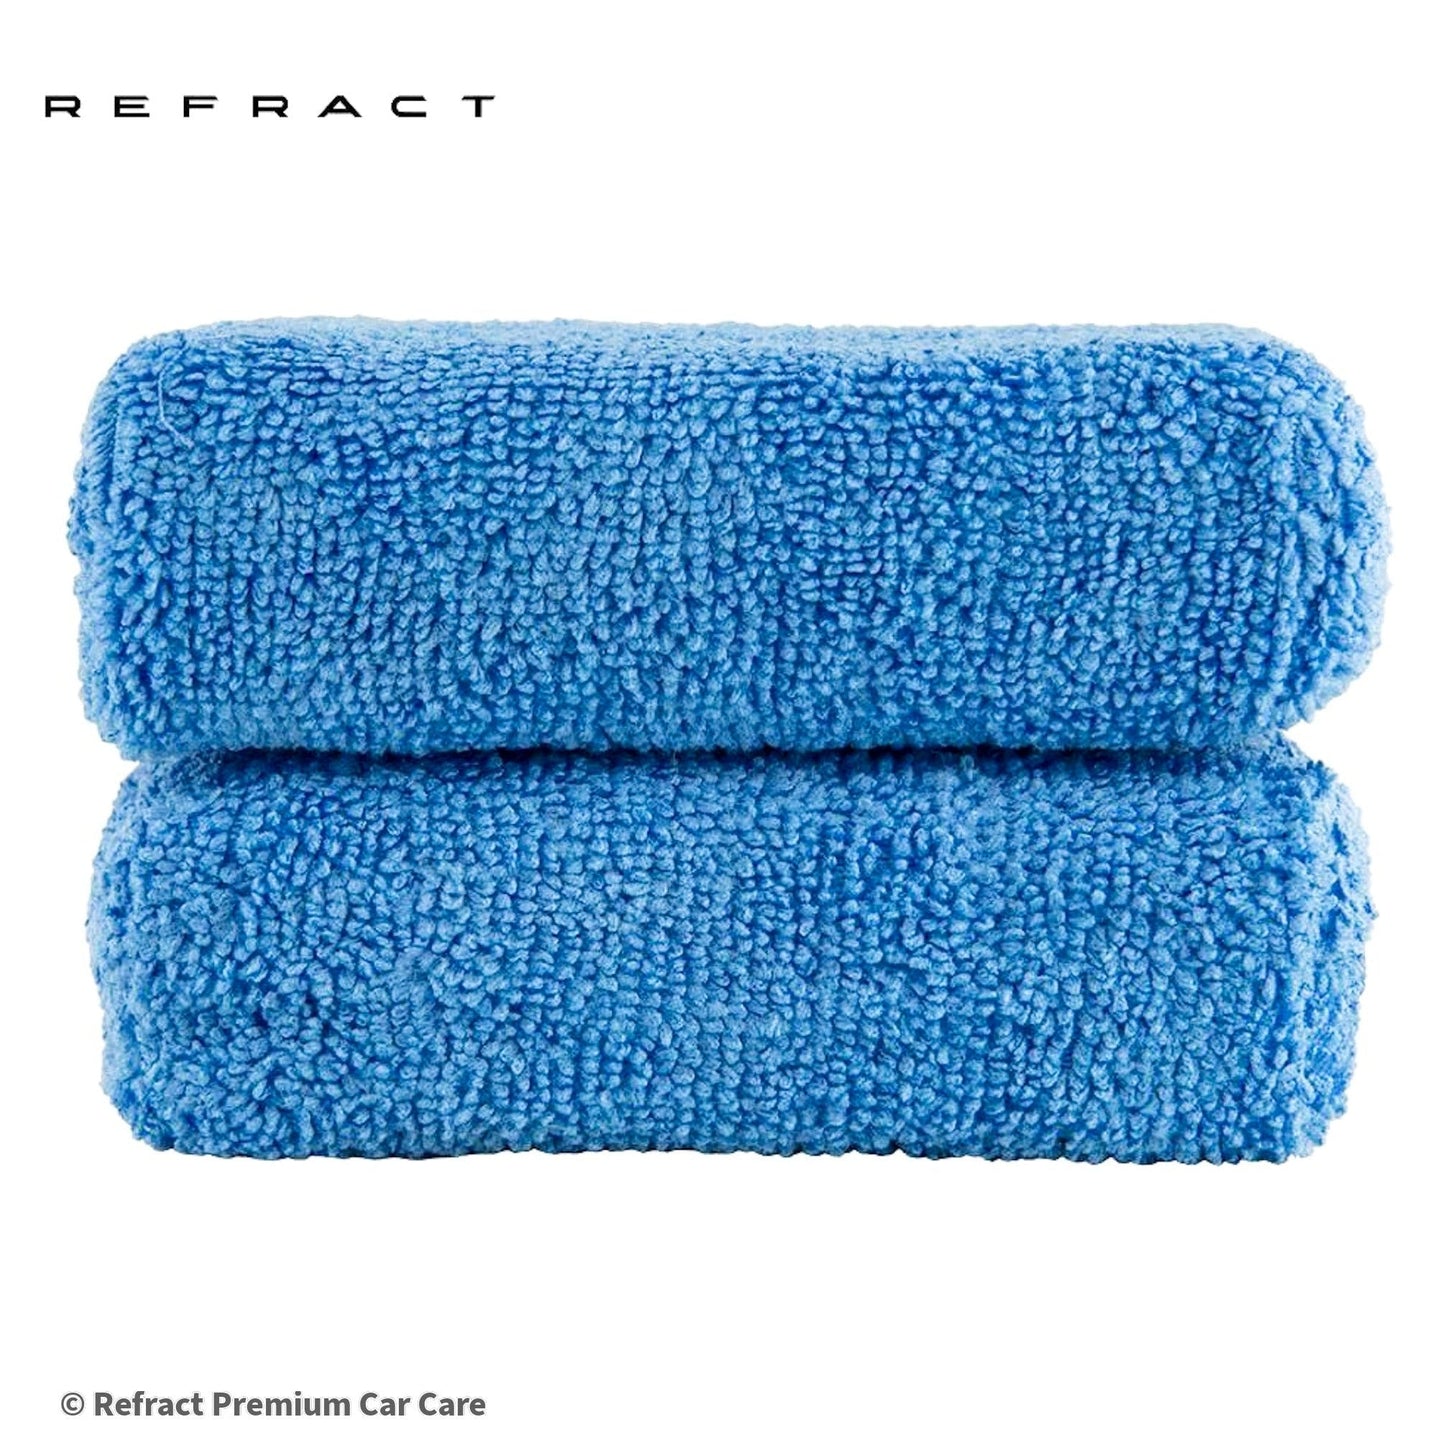 Refract Premium Car Care Products Microfiber Applicator Wax & Sealant Pads - Twin Pack $11.95